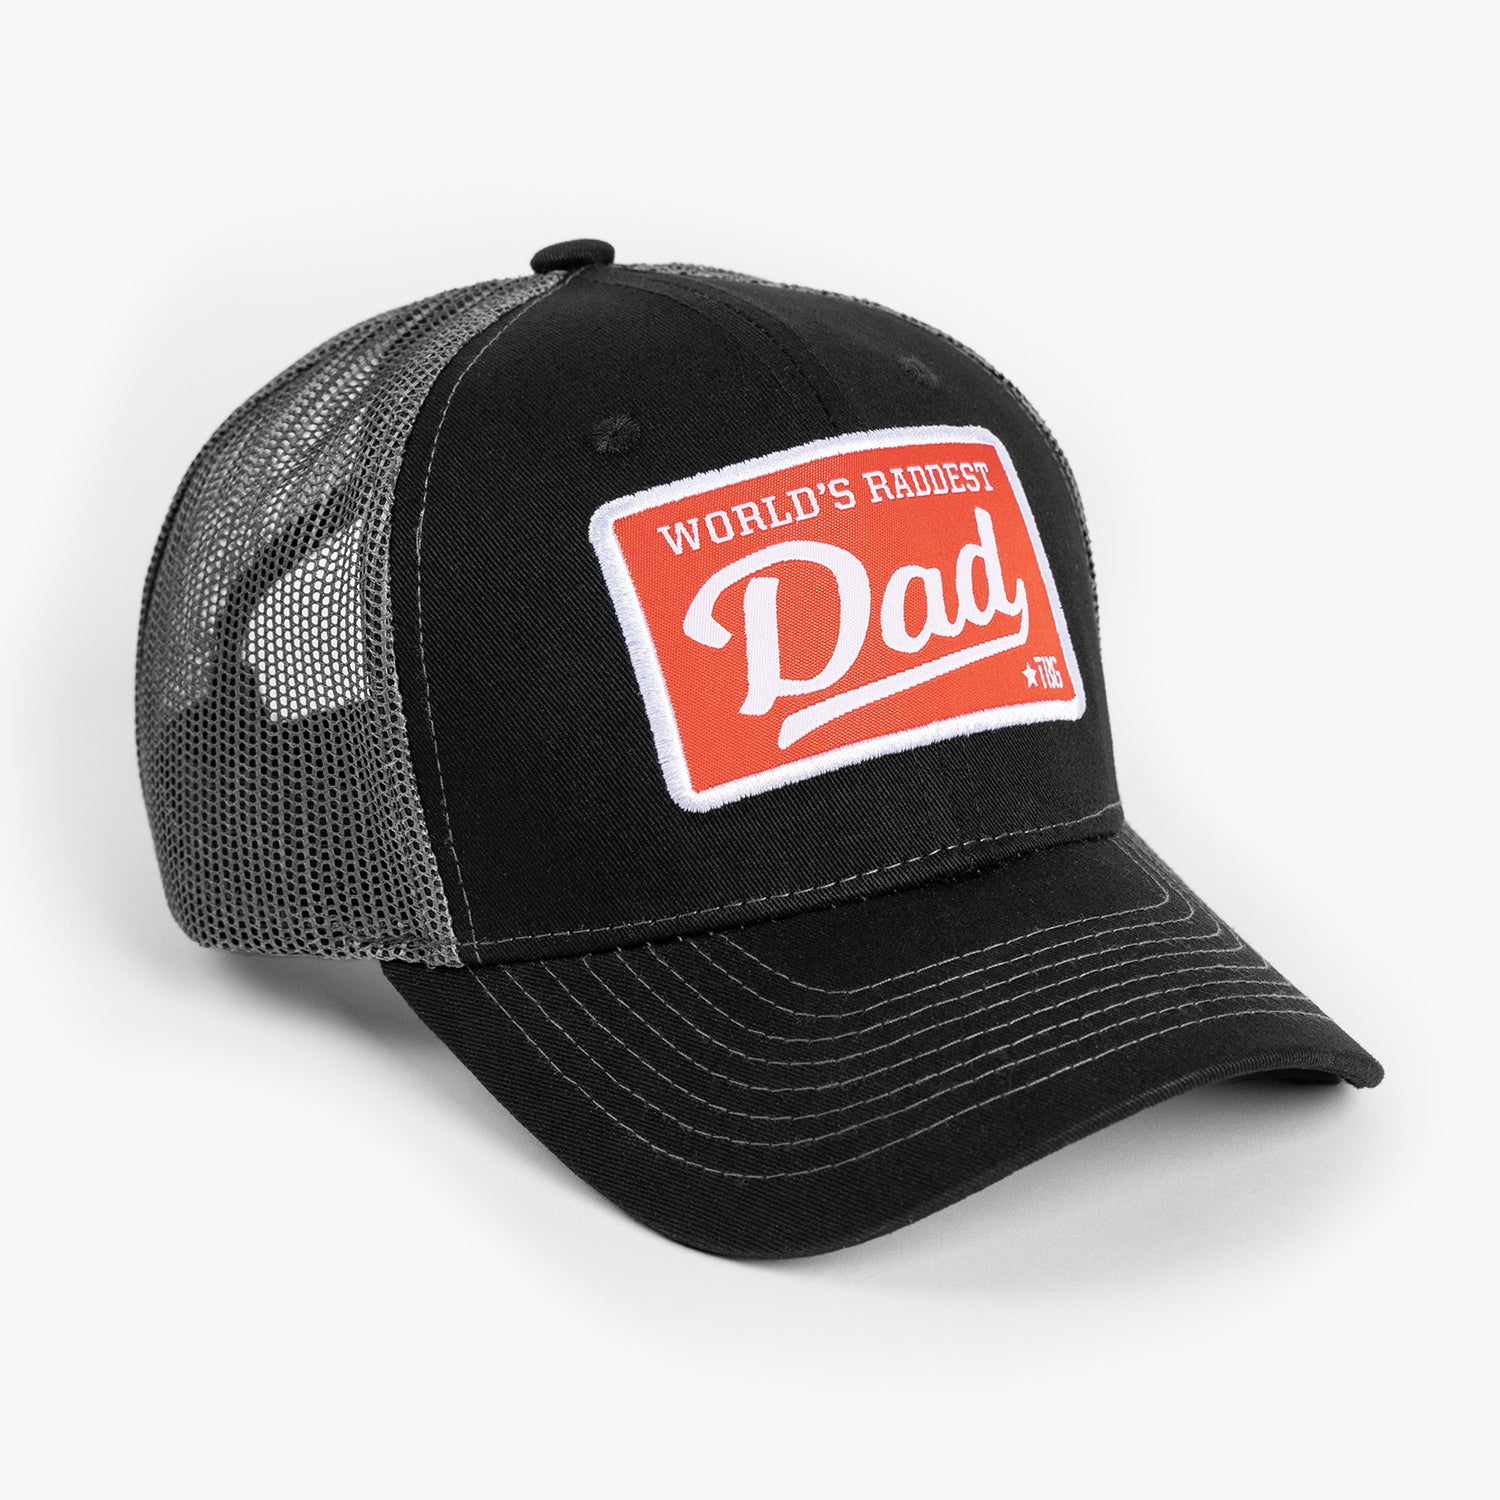 World's Raddest Dad hat shown with gray mesh in back visible and primary black on bill and front